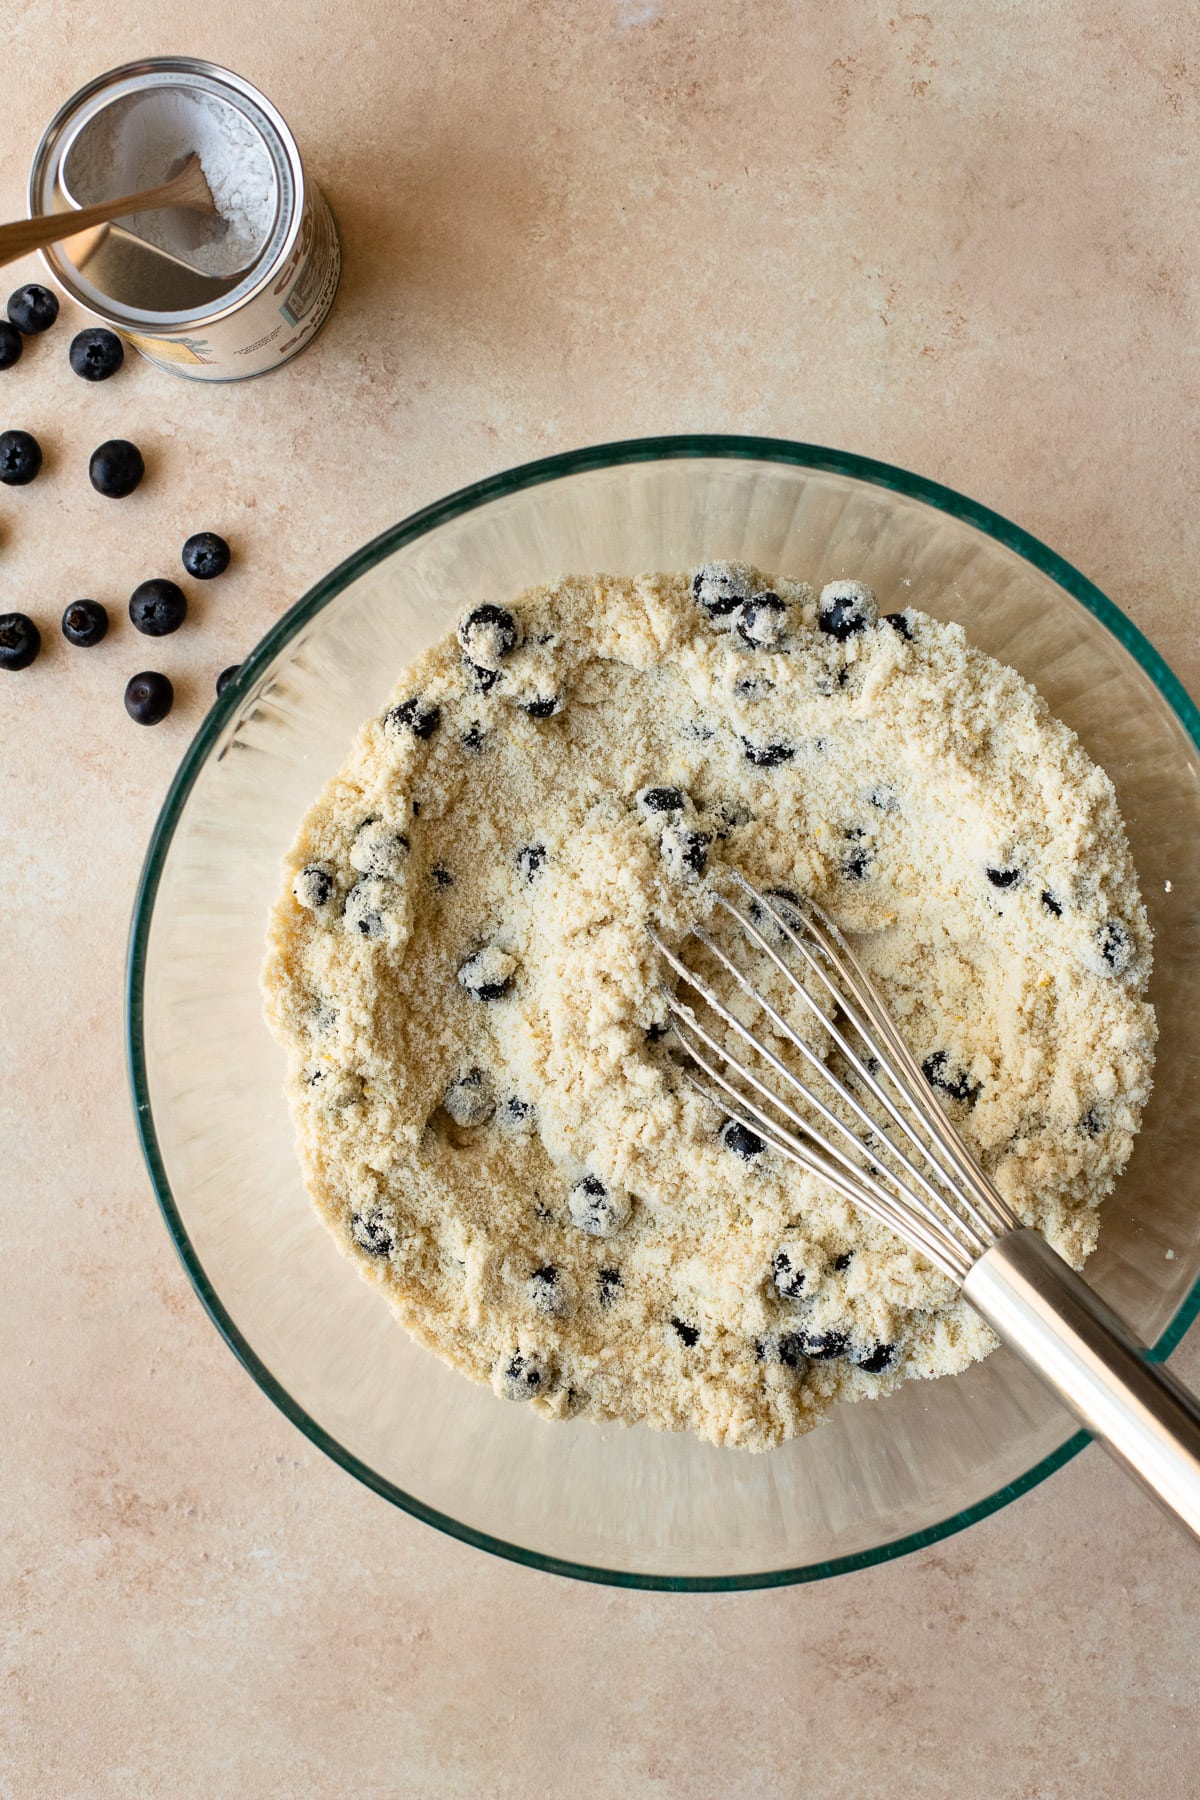 Almond flour, tapioca starch, baking powder, salt, lemon zest, and blueberries whisked together in a glass bowl.